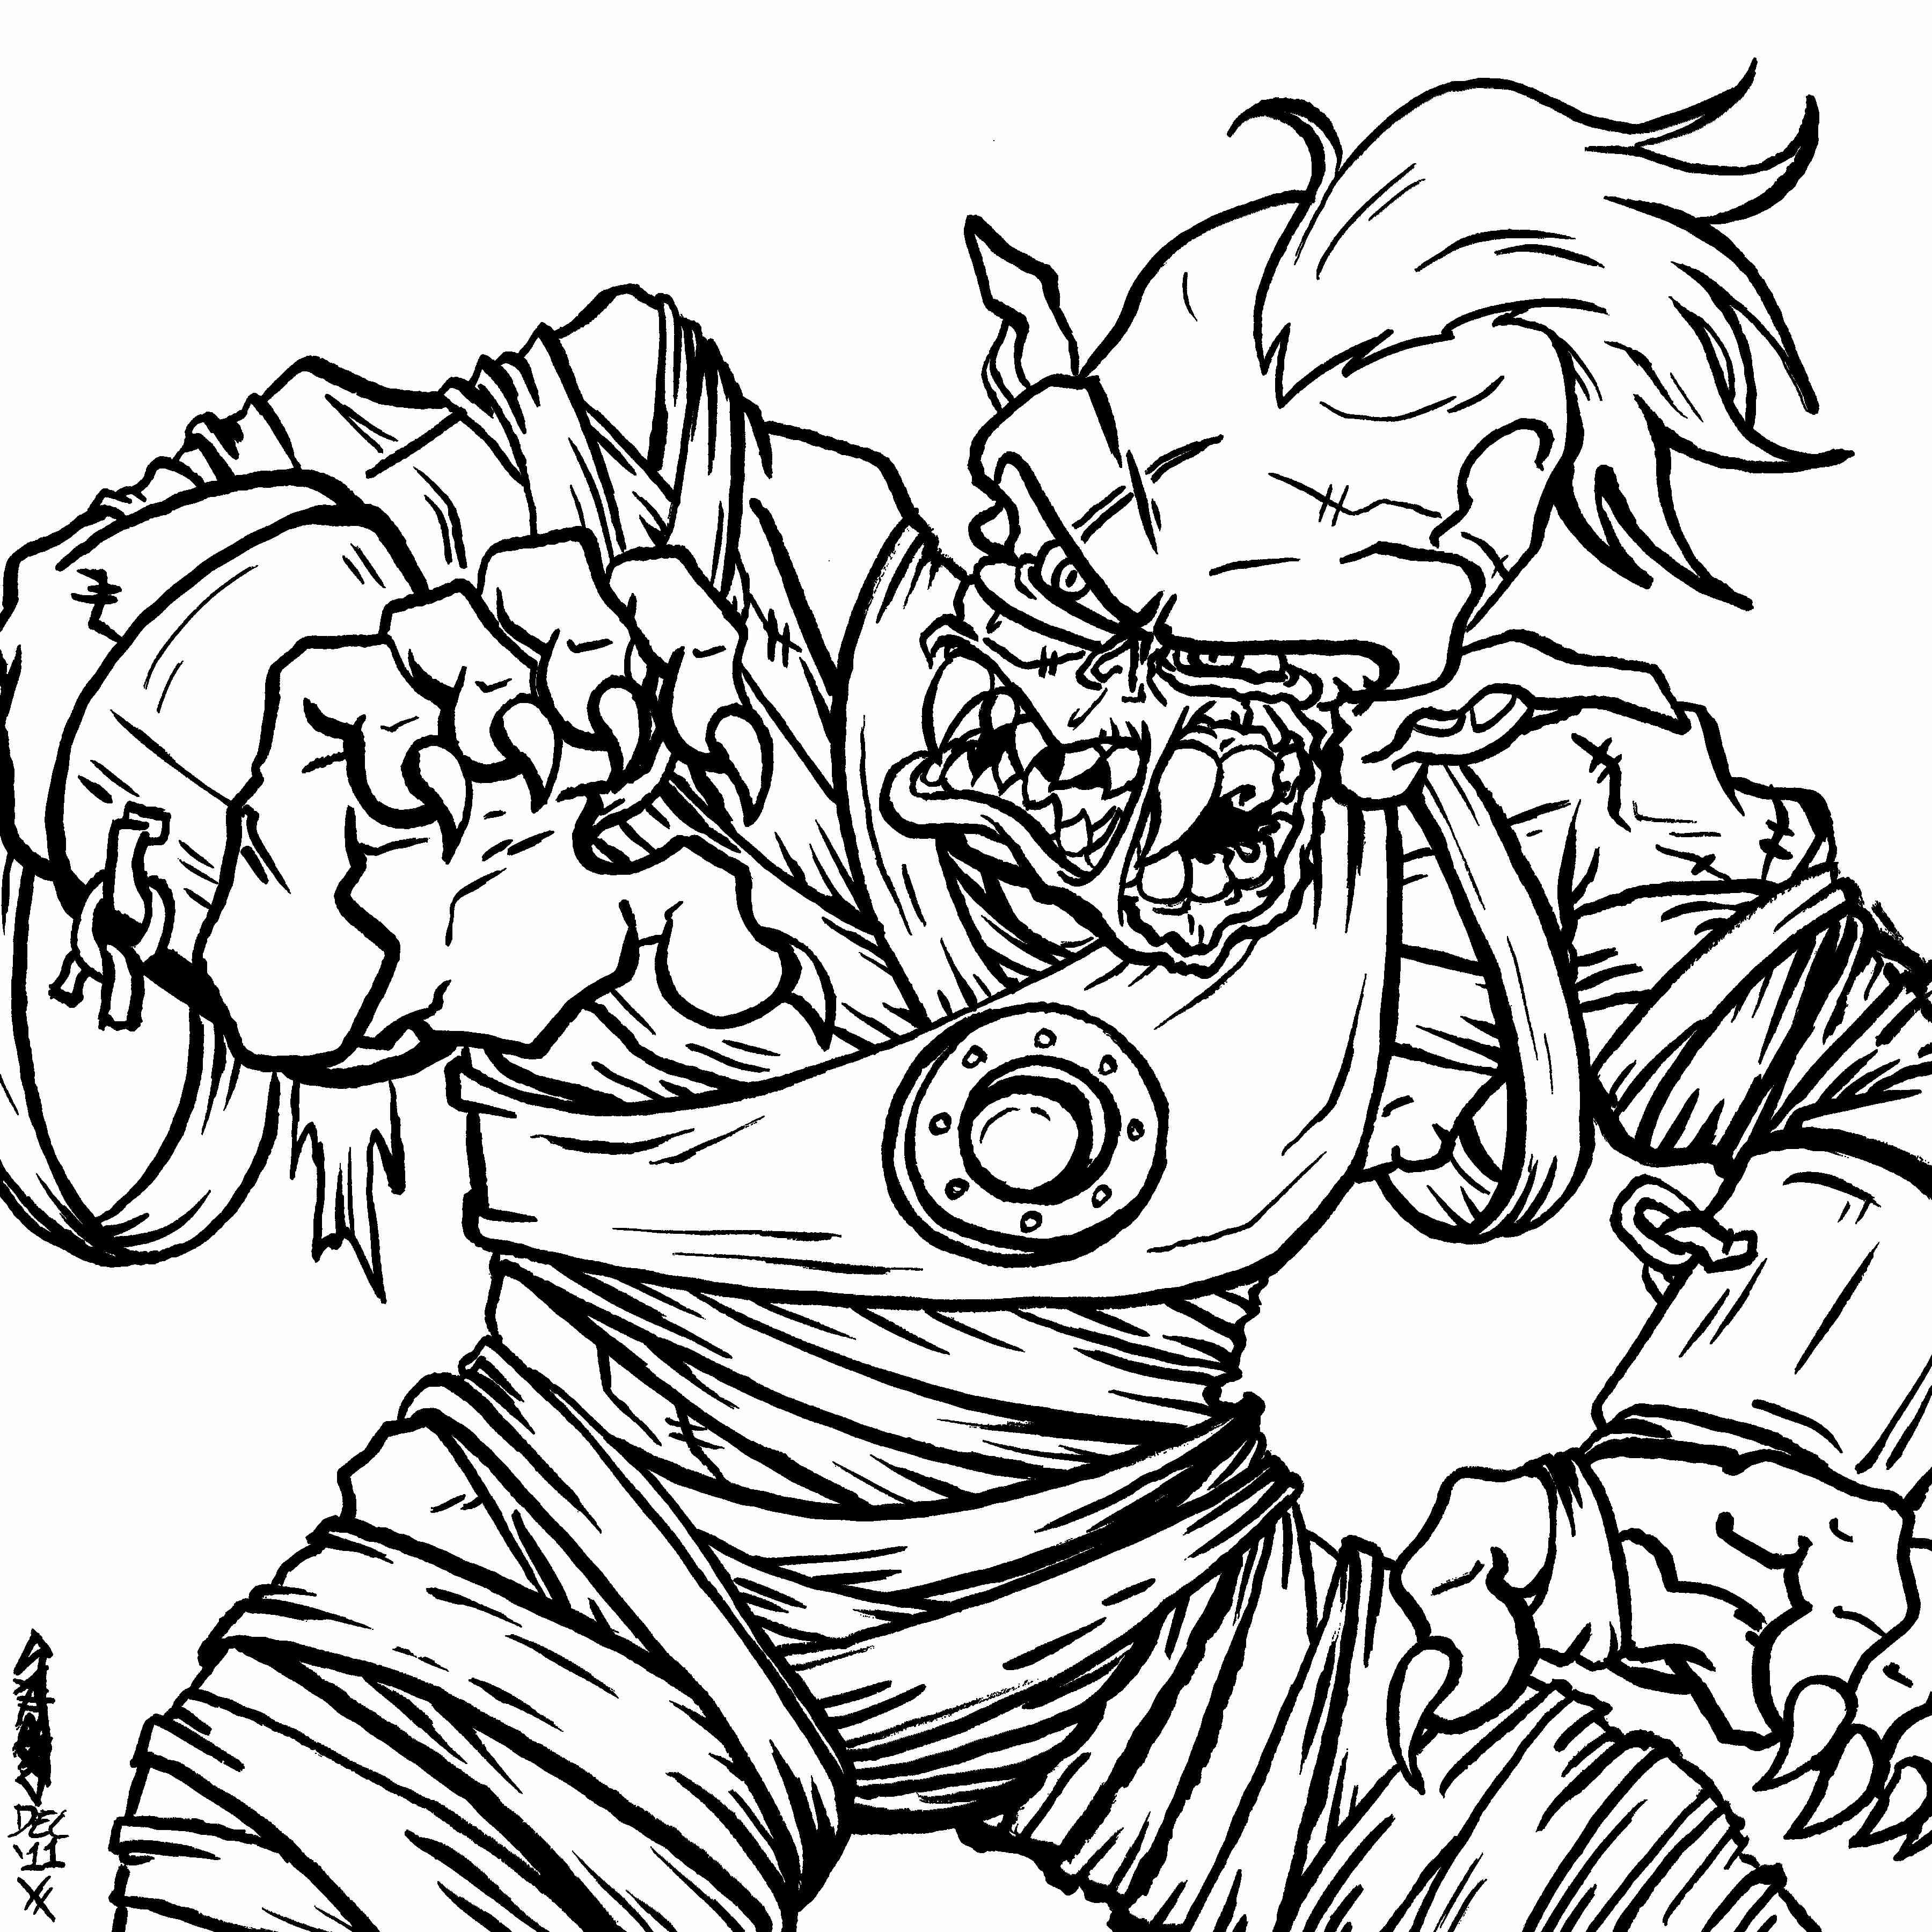 Printable Disney Zombies Coloring Pages - Coloring Pages for Kids